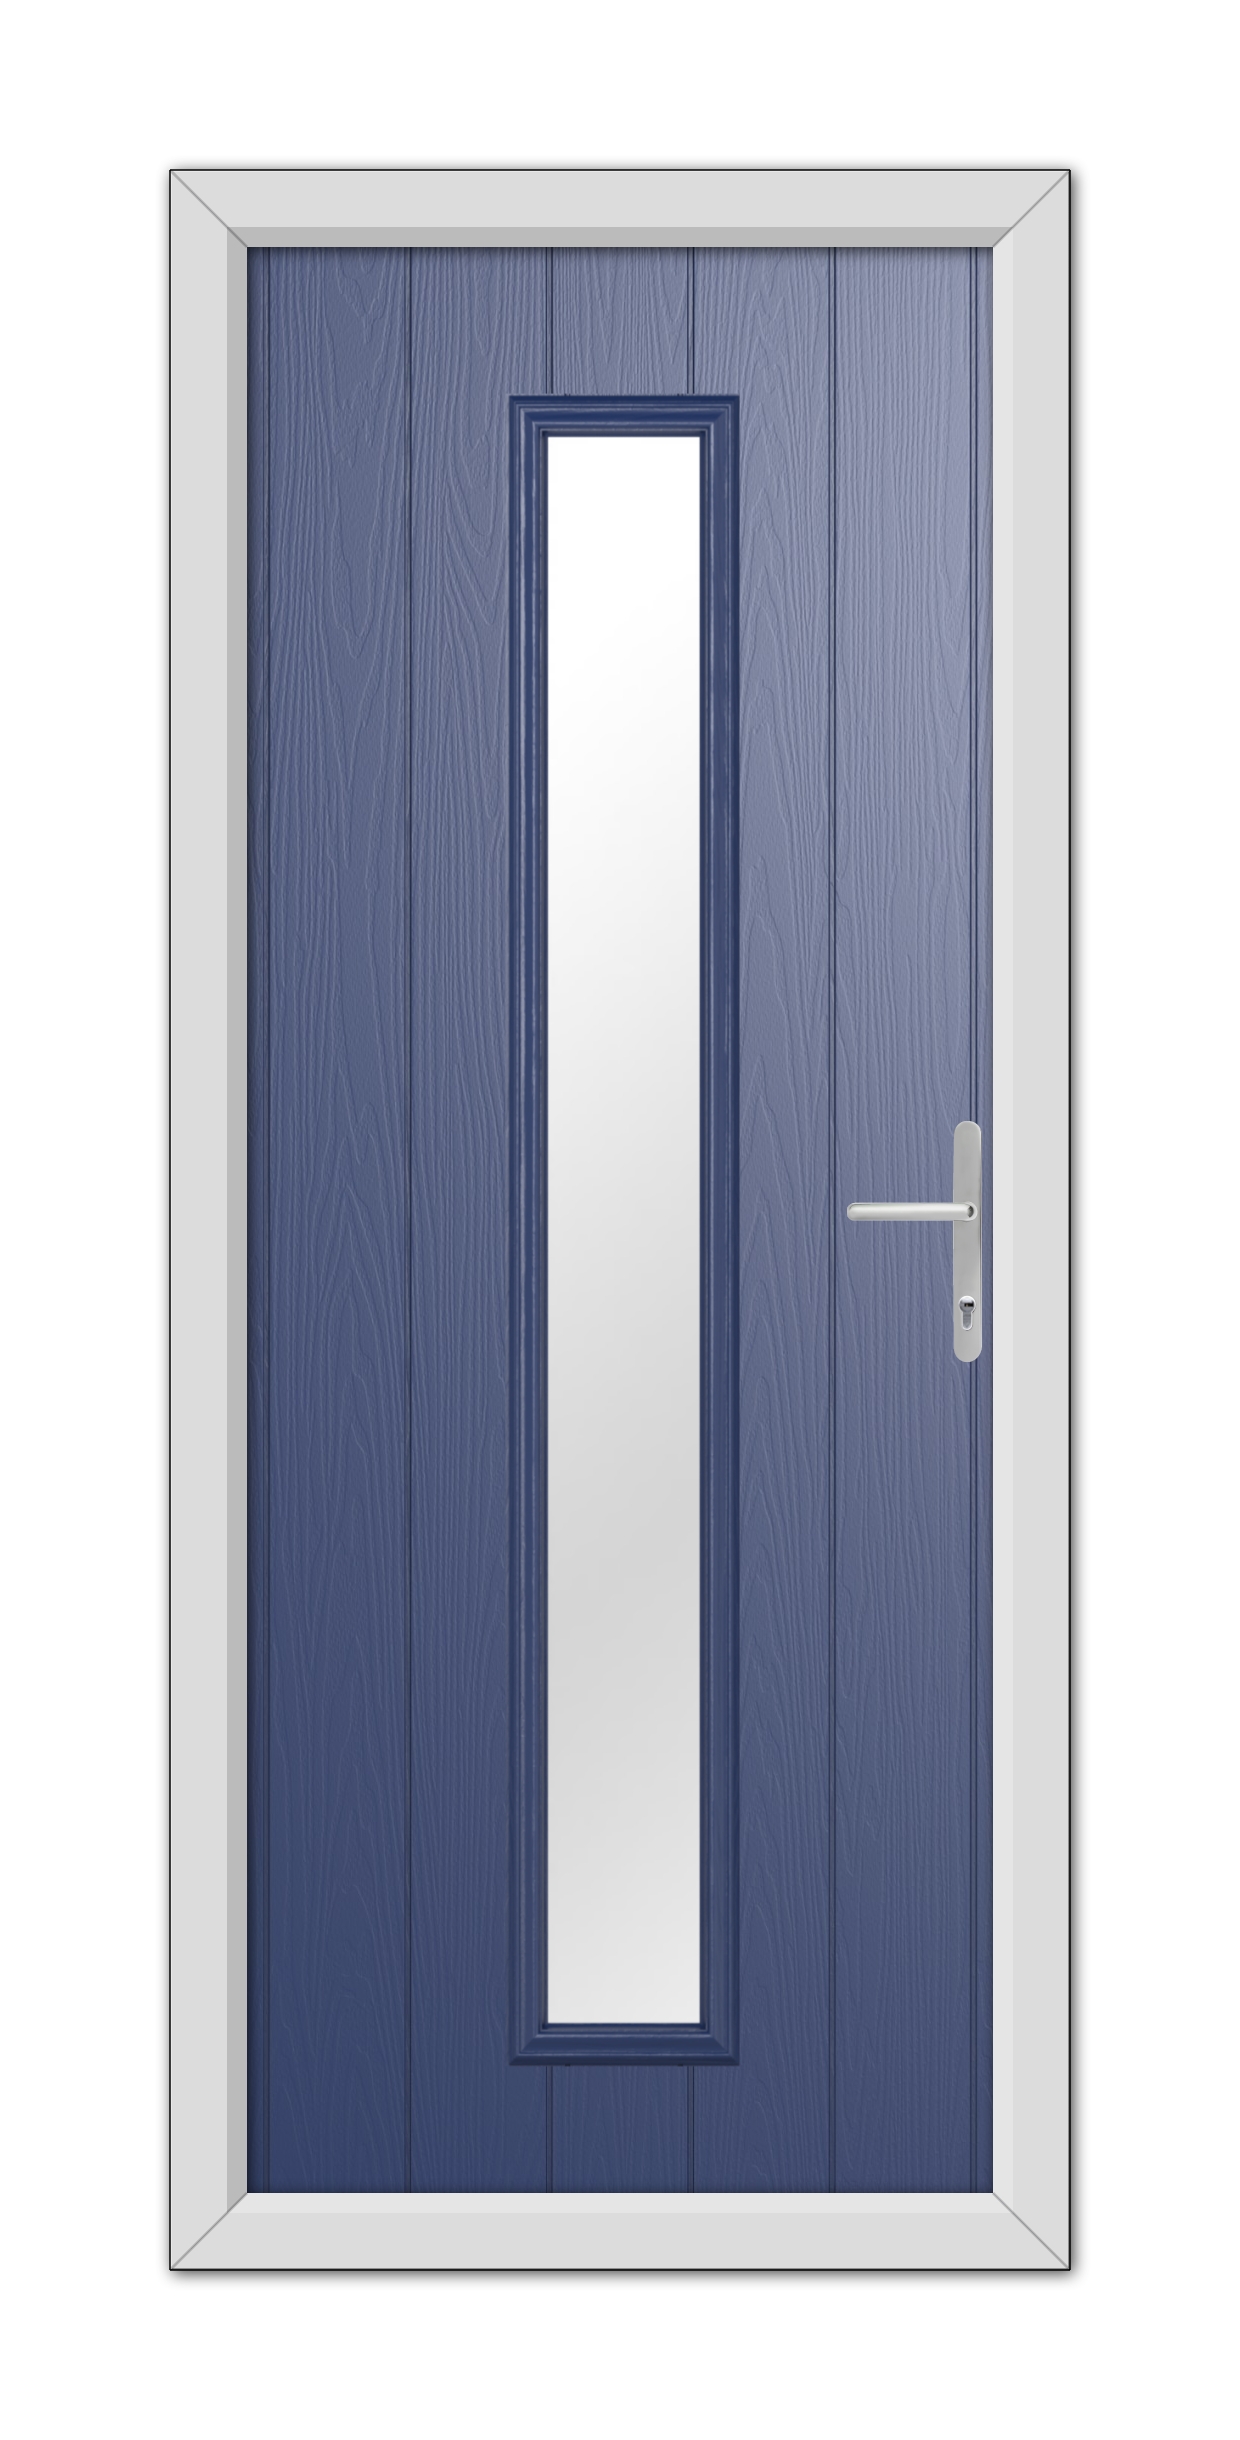 A Blue Rutland Composite Door 48mm Timber Core with a vertical handle, surrounded by a white frame, featuring a narrow rectangular window.